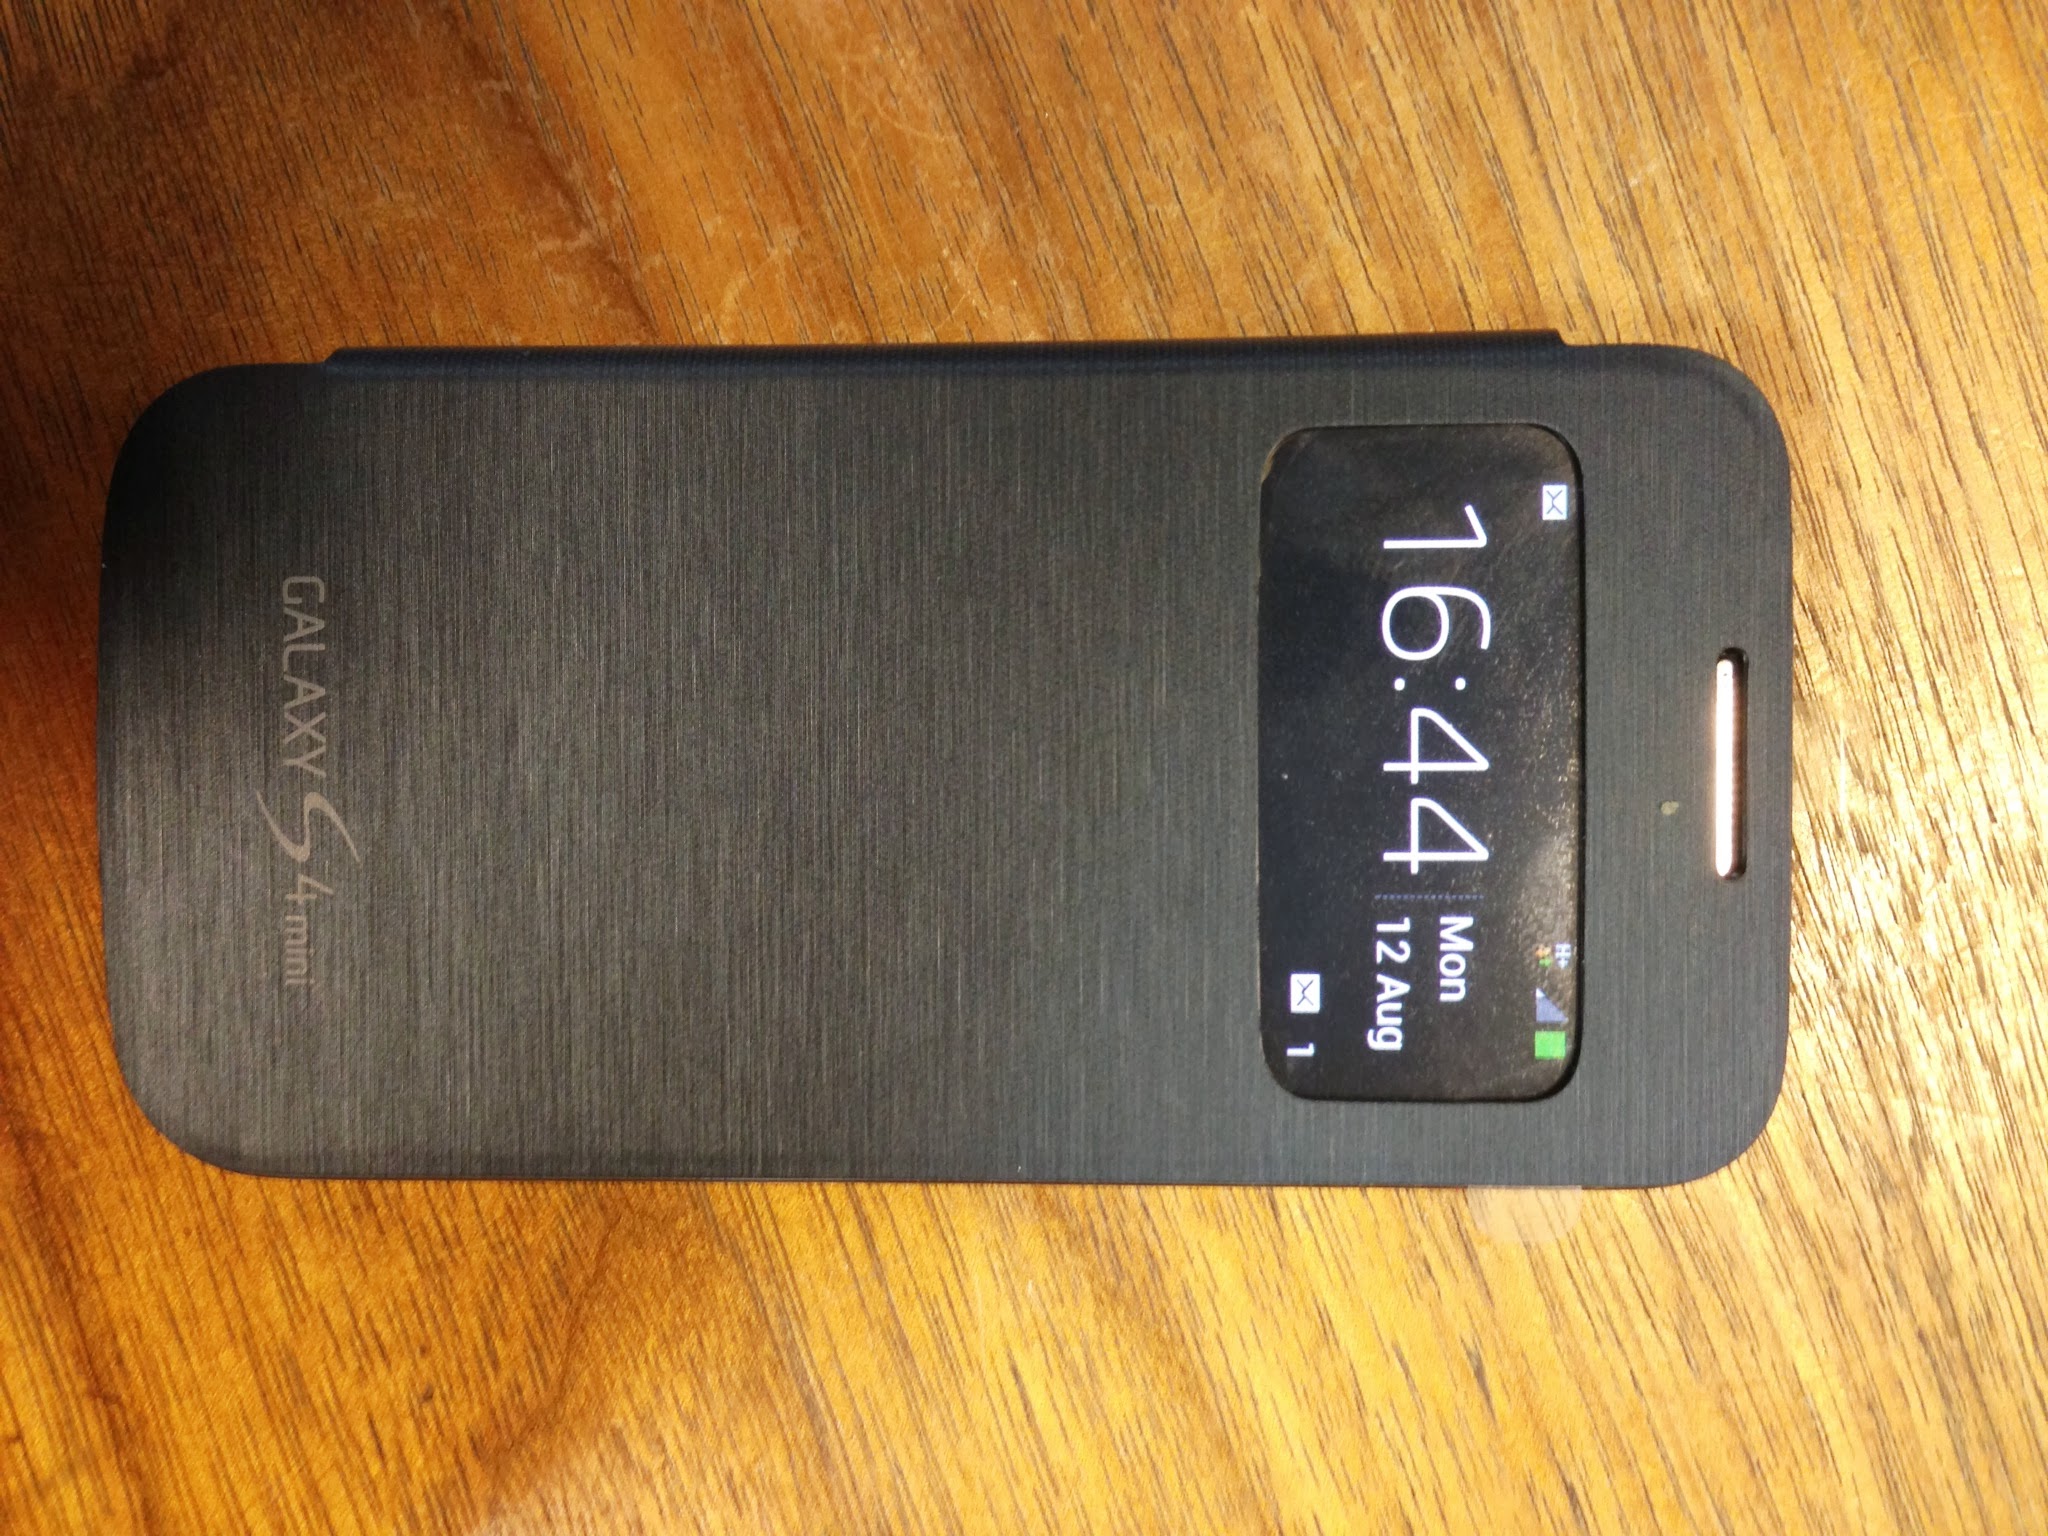 Gecomprimeerd dealer land Official Samsung S View cover for Galaxy S4 mini - review - Coolsmartphone